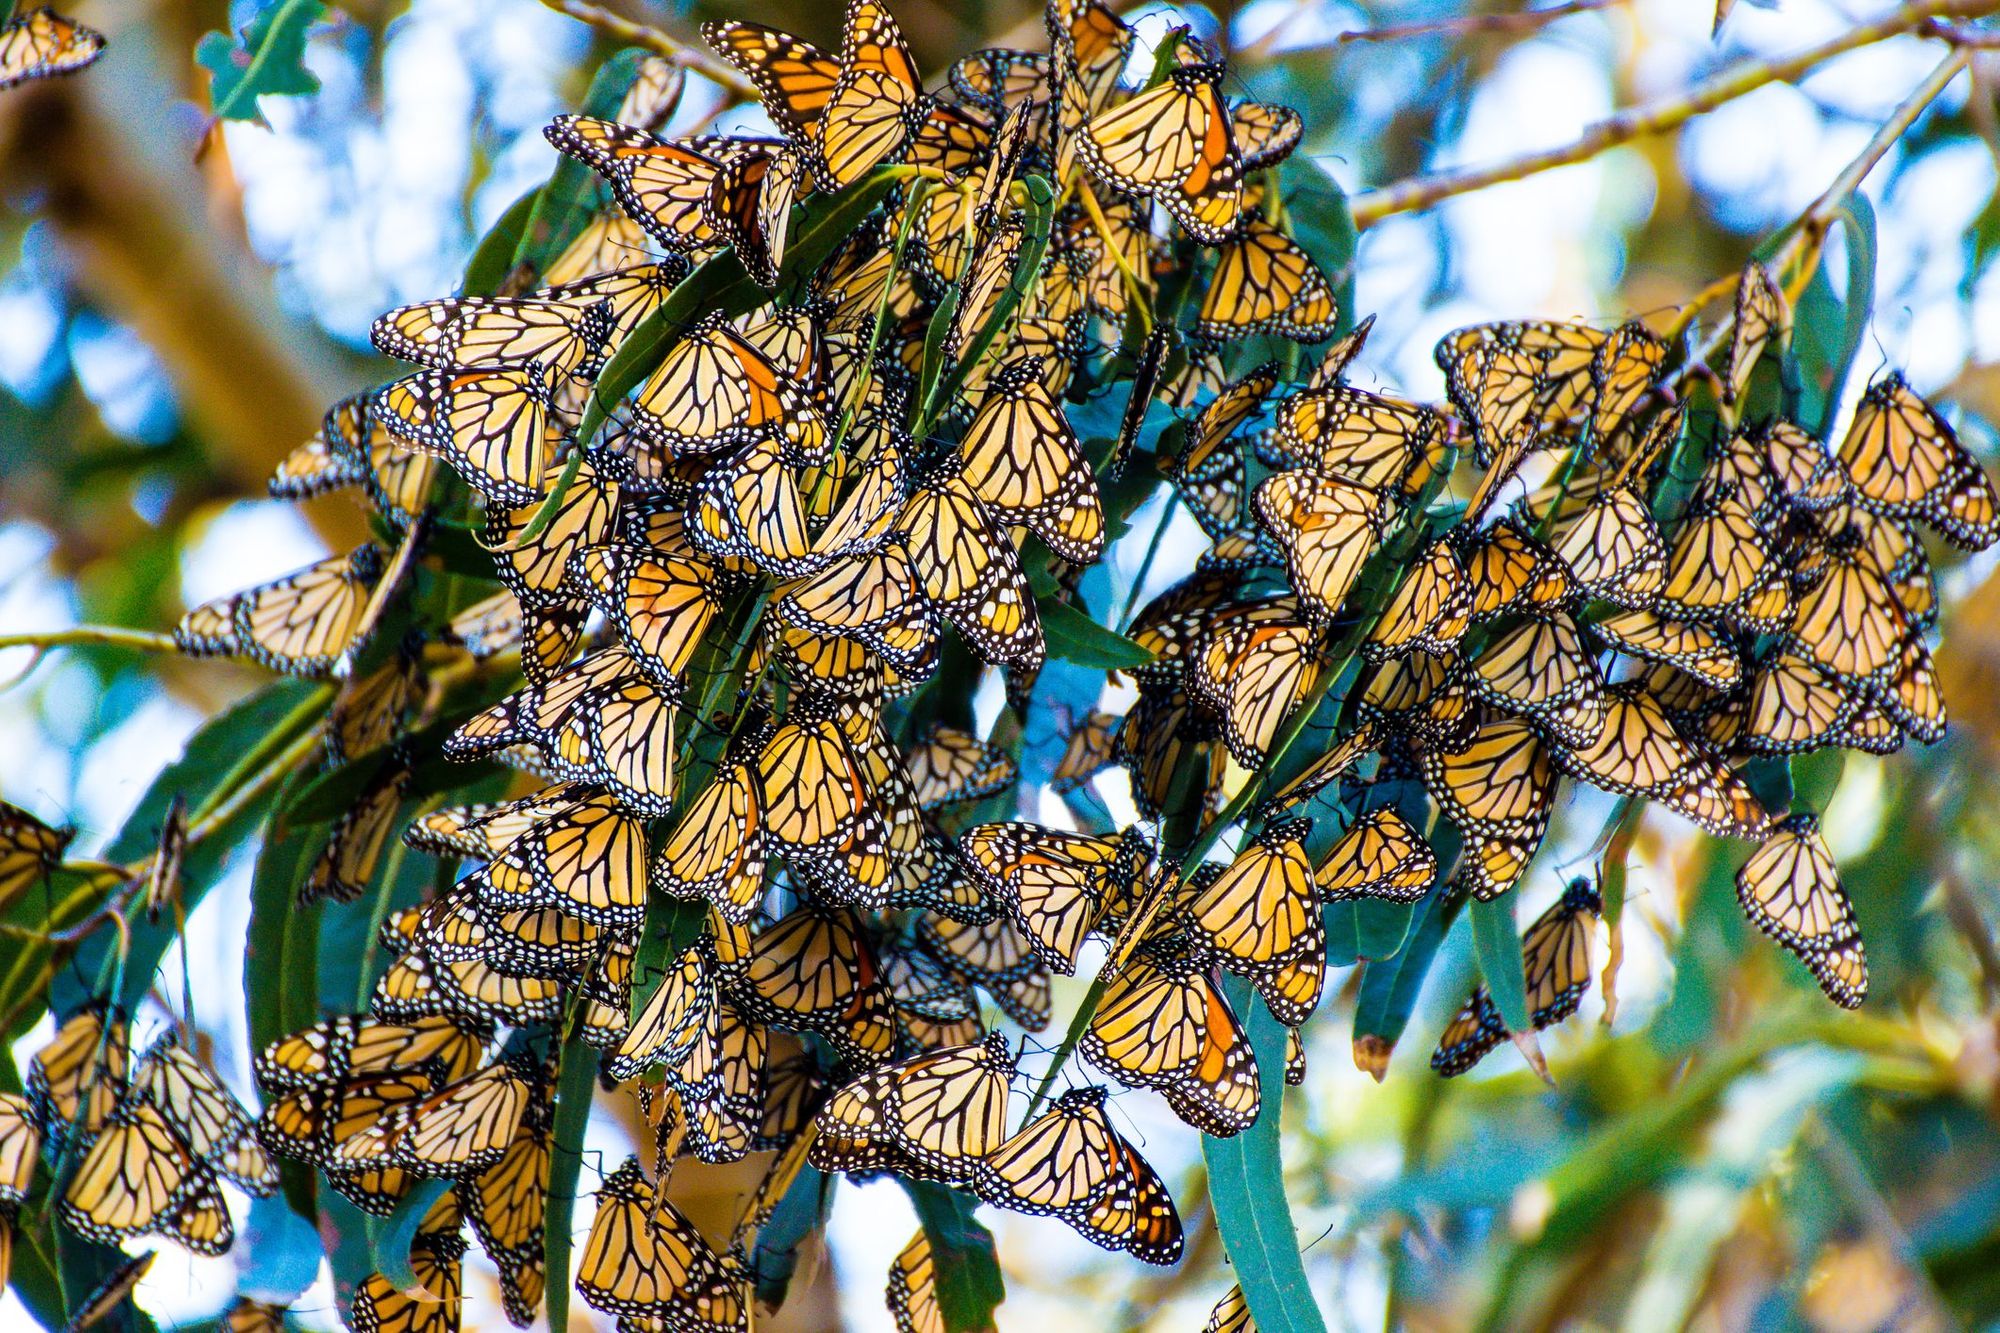 A cluster of Monarch butterflies on their annual migration.